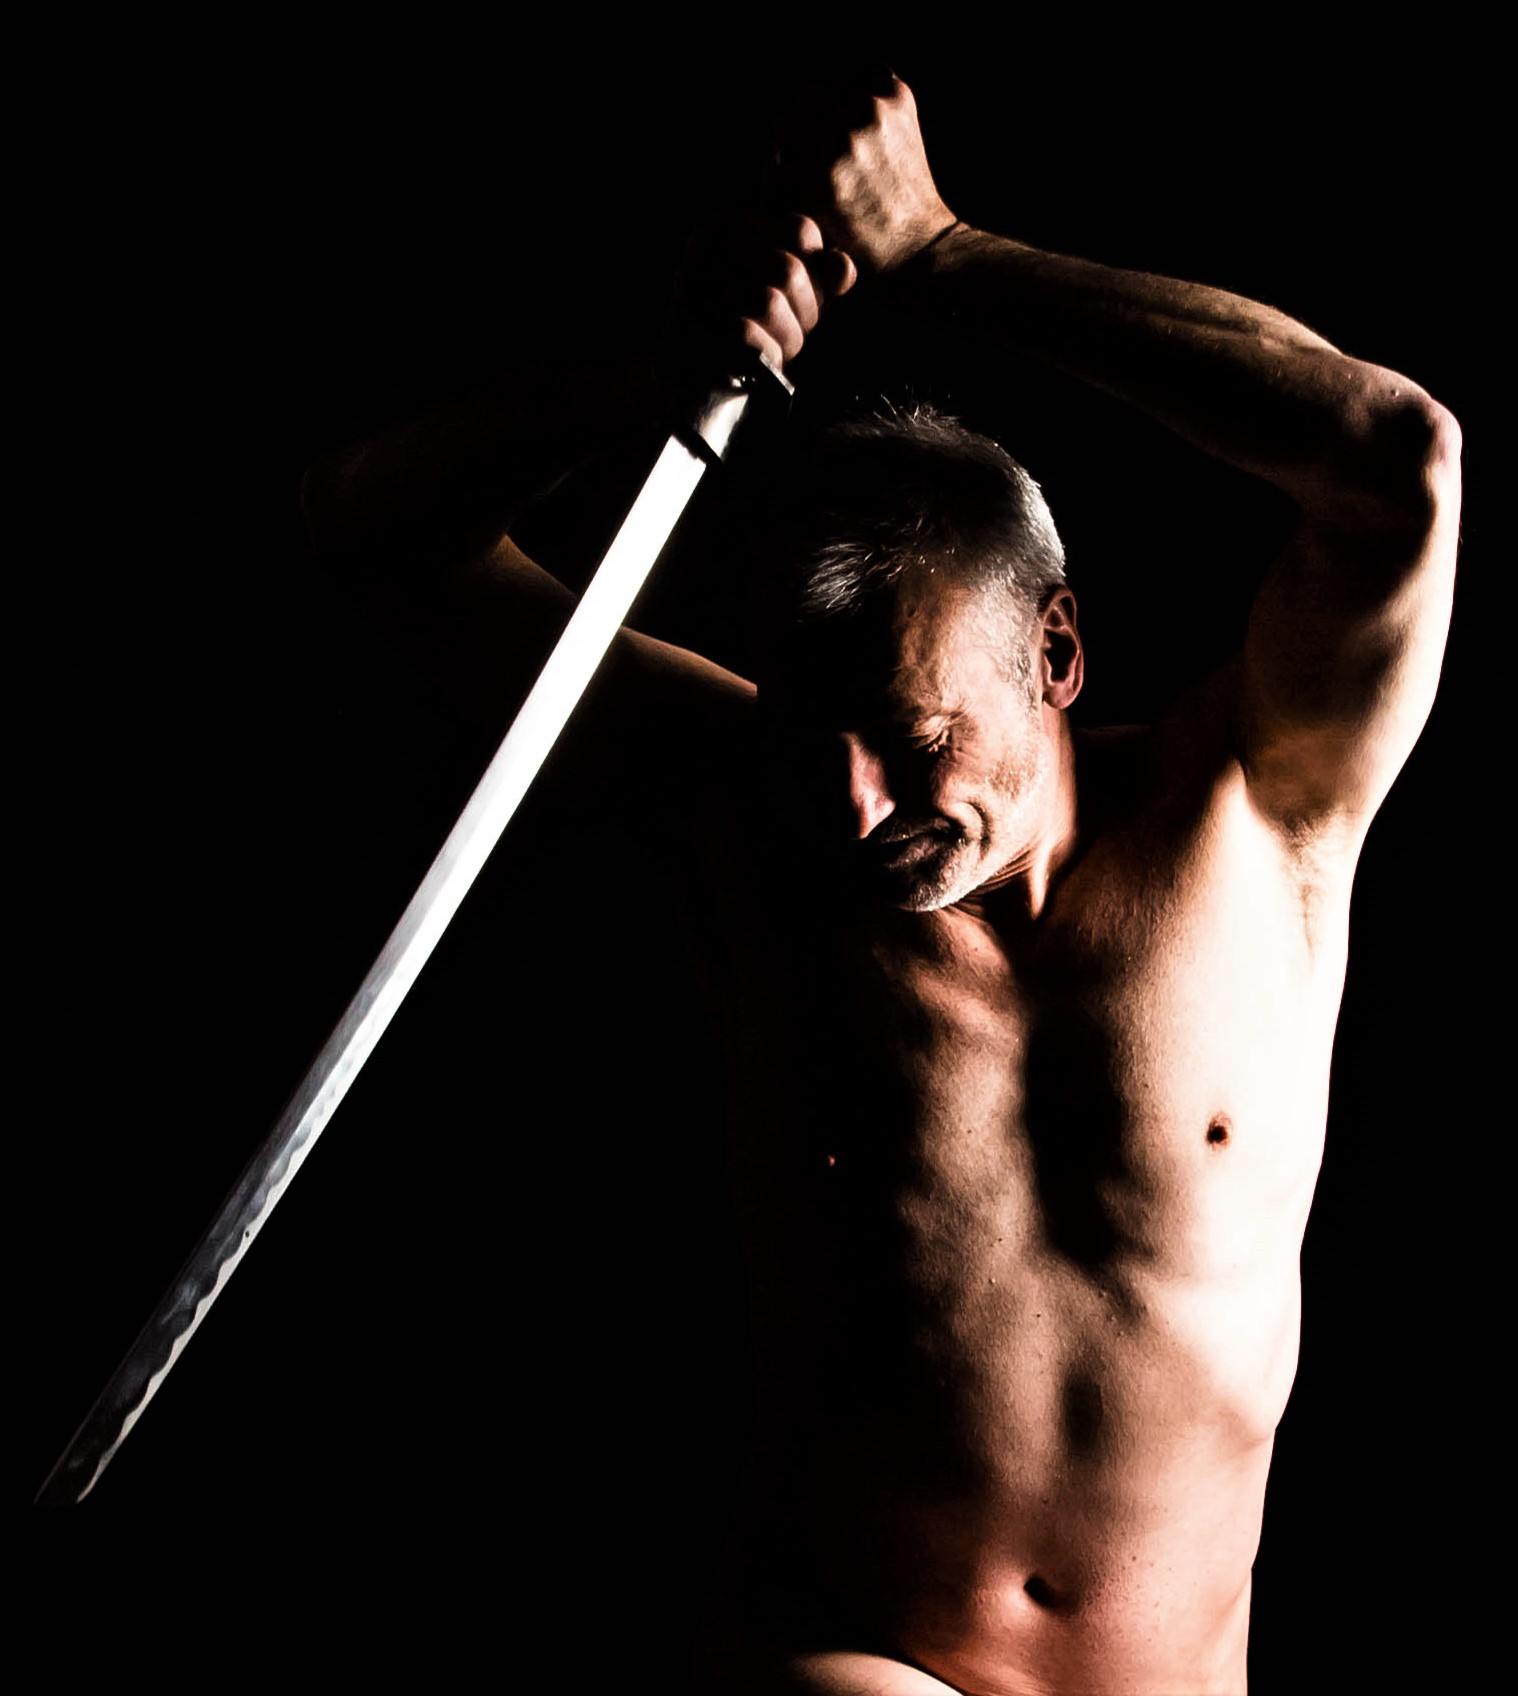 life model Julian, posing with a sword in dramatic light for an artist to draw or sculpt